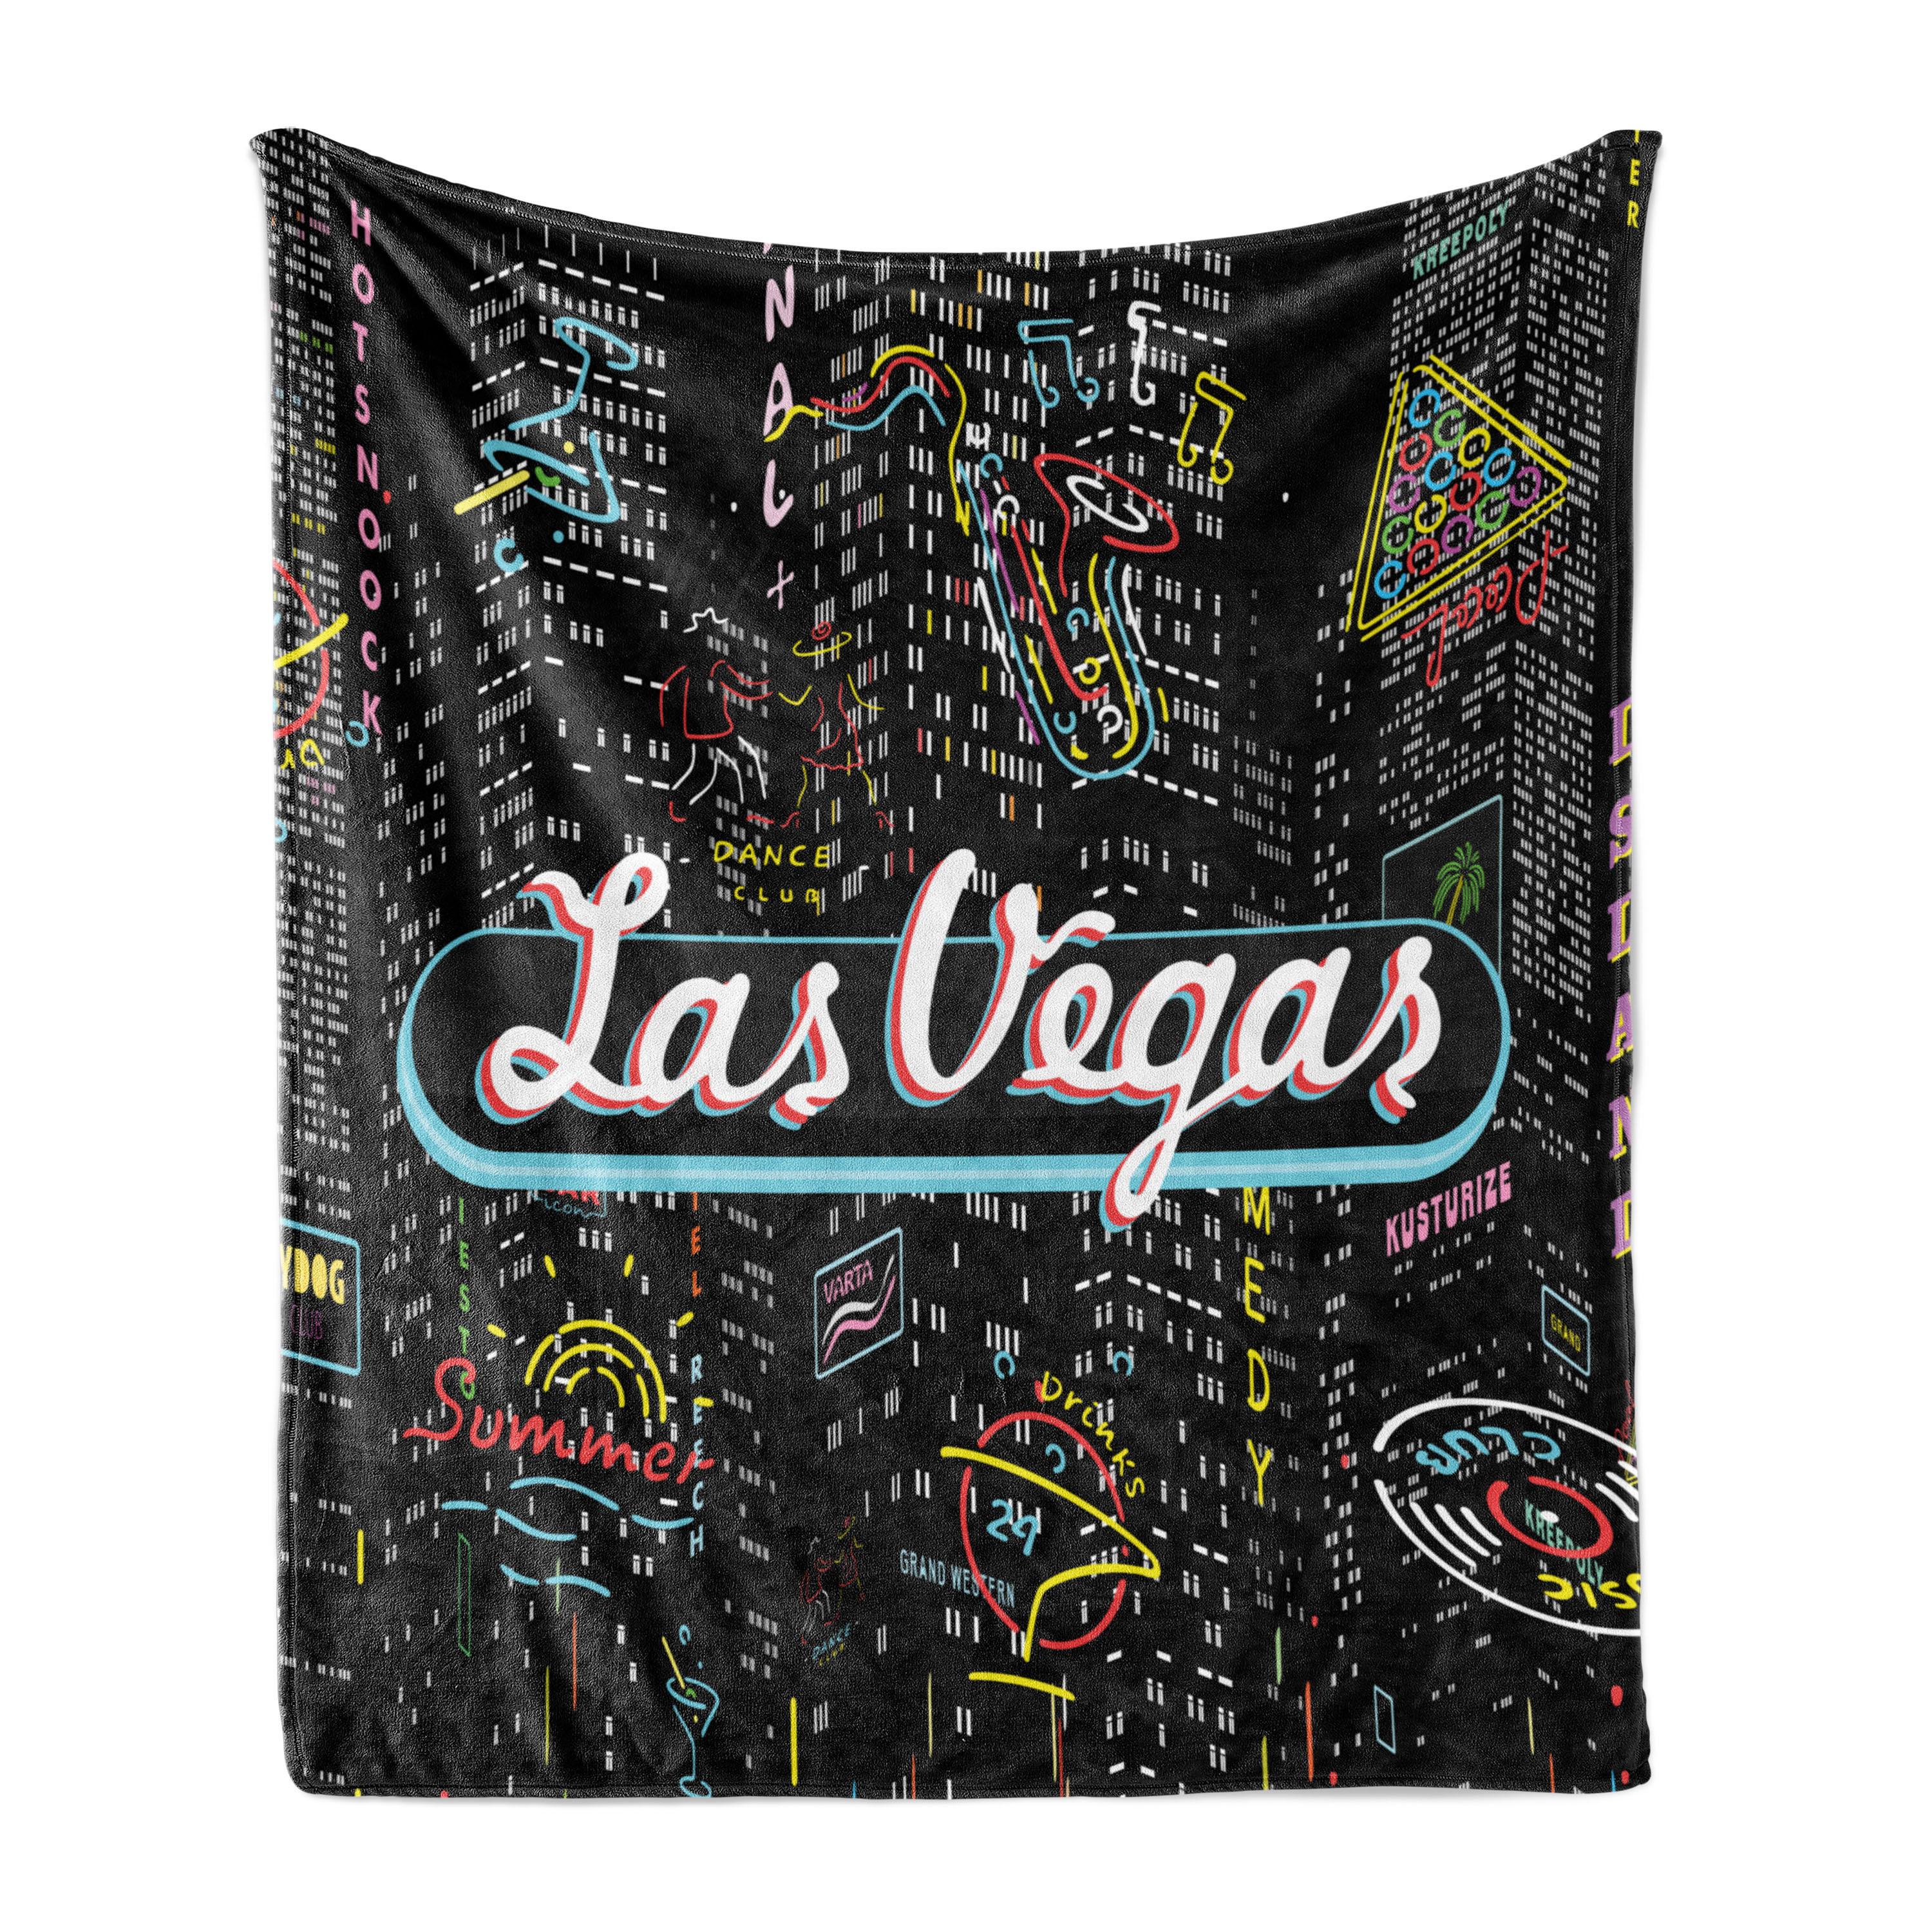 Las Vegas Soft Flannel Fleece Blanket, Colorful Elements of Vegas Entertaintment Monochrome Buildings Sax and Bar Signs, Cozy Plush for Indoor and Outdoor Use, 50" x 70", Multicolor, by Ambesonne - image 1 of 6